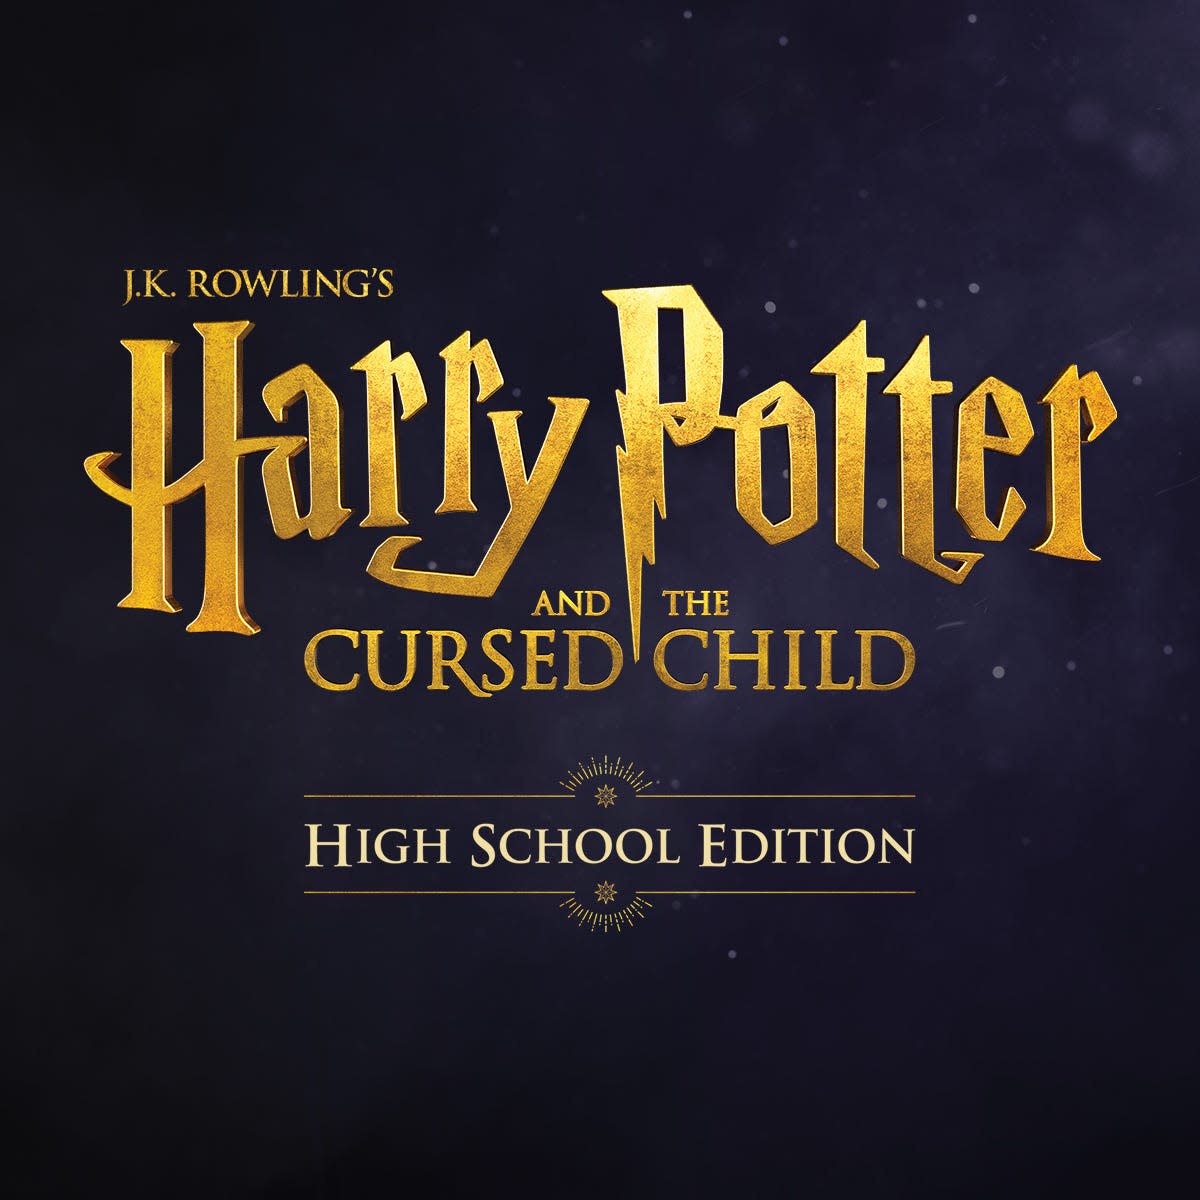 Madison Theater will be the first high school in Indiana to produce the high school edition of the play "Harry Potter and the Cursed Child," whose story is by J.K. Rowling.